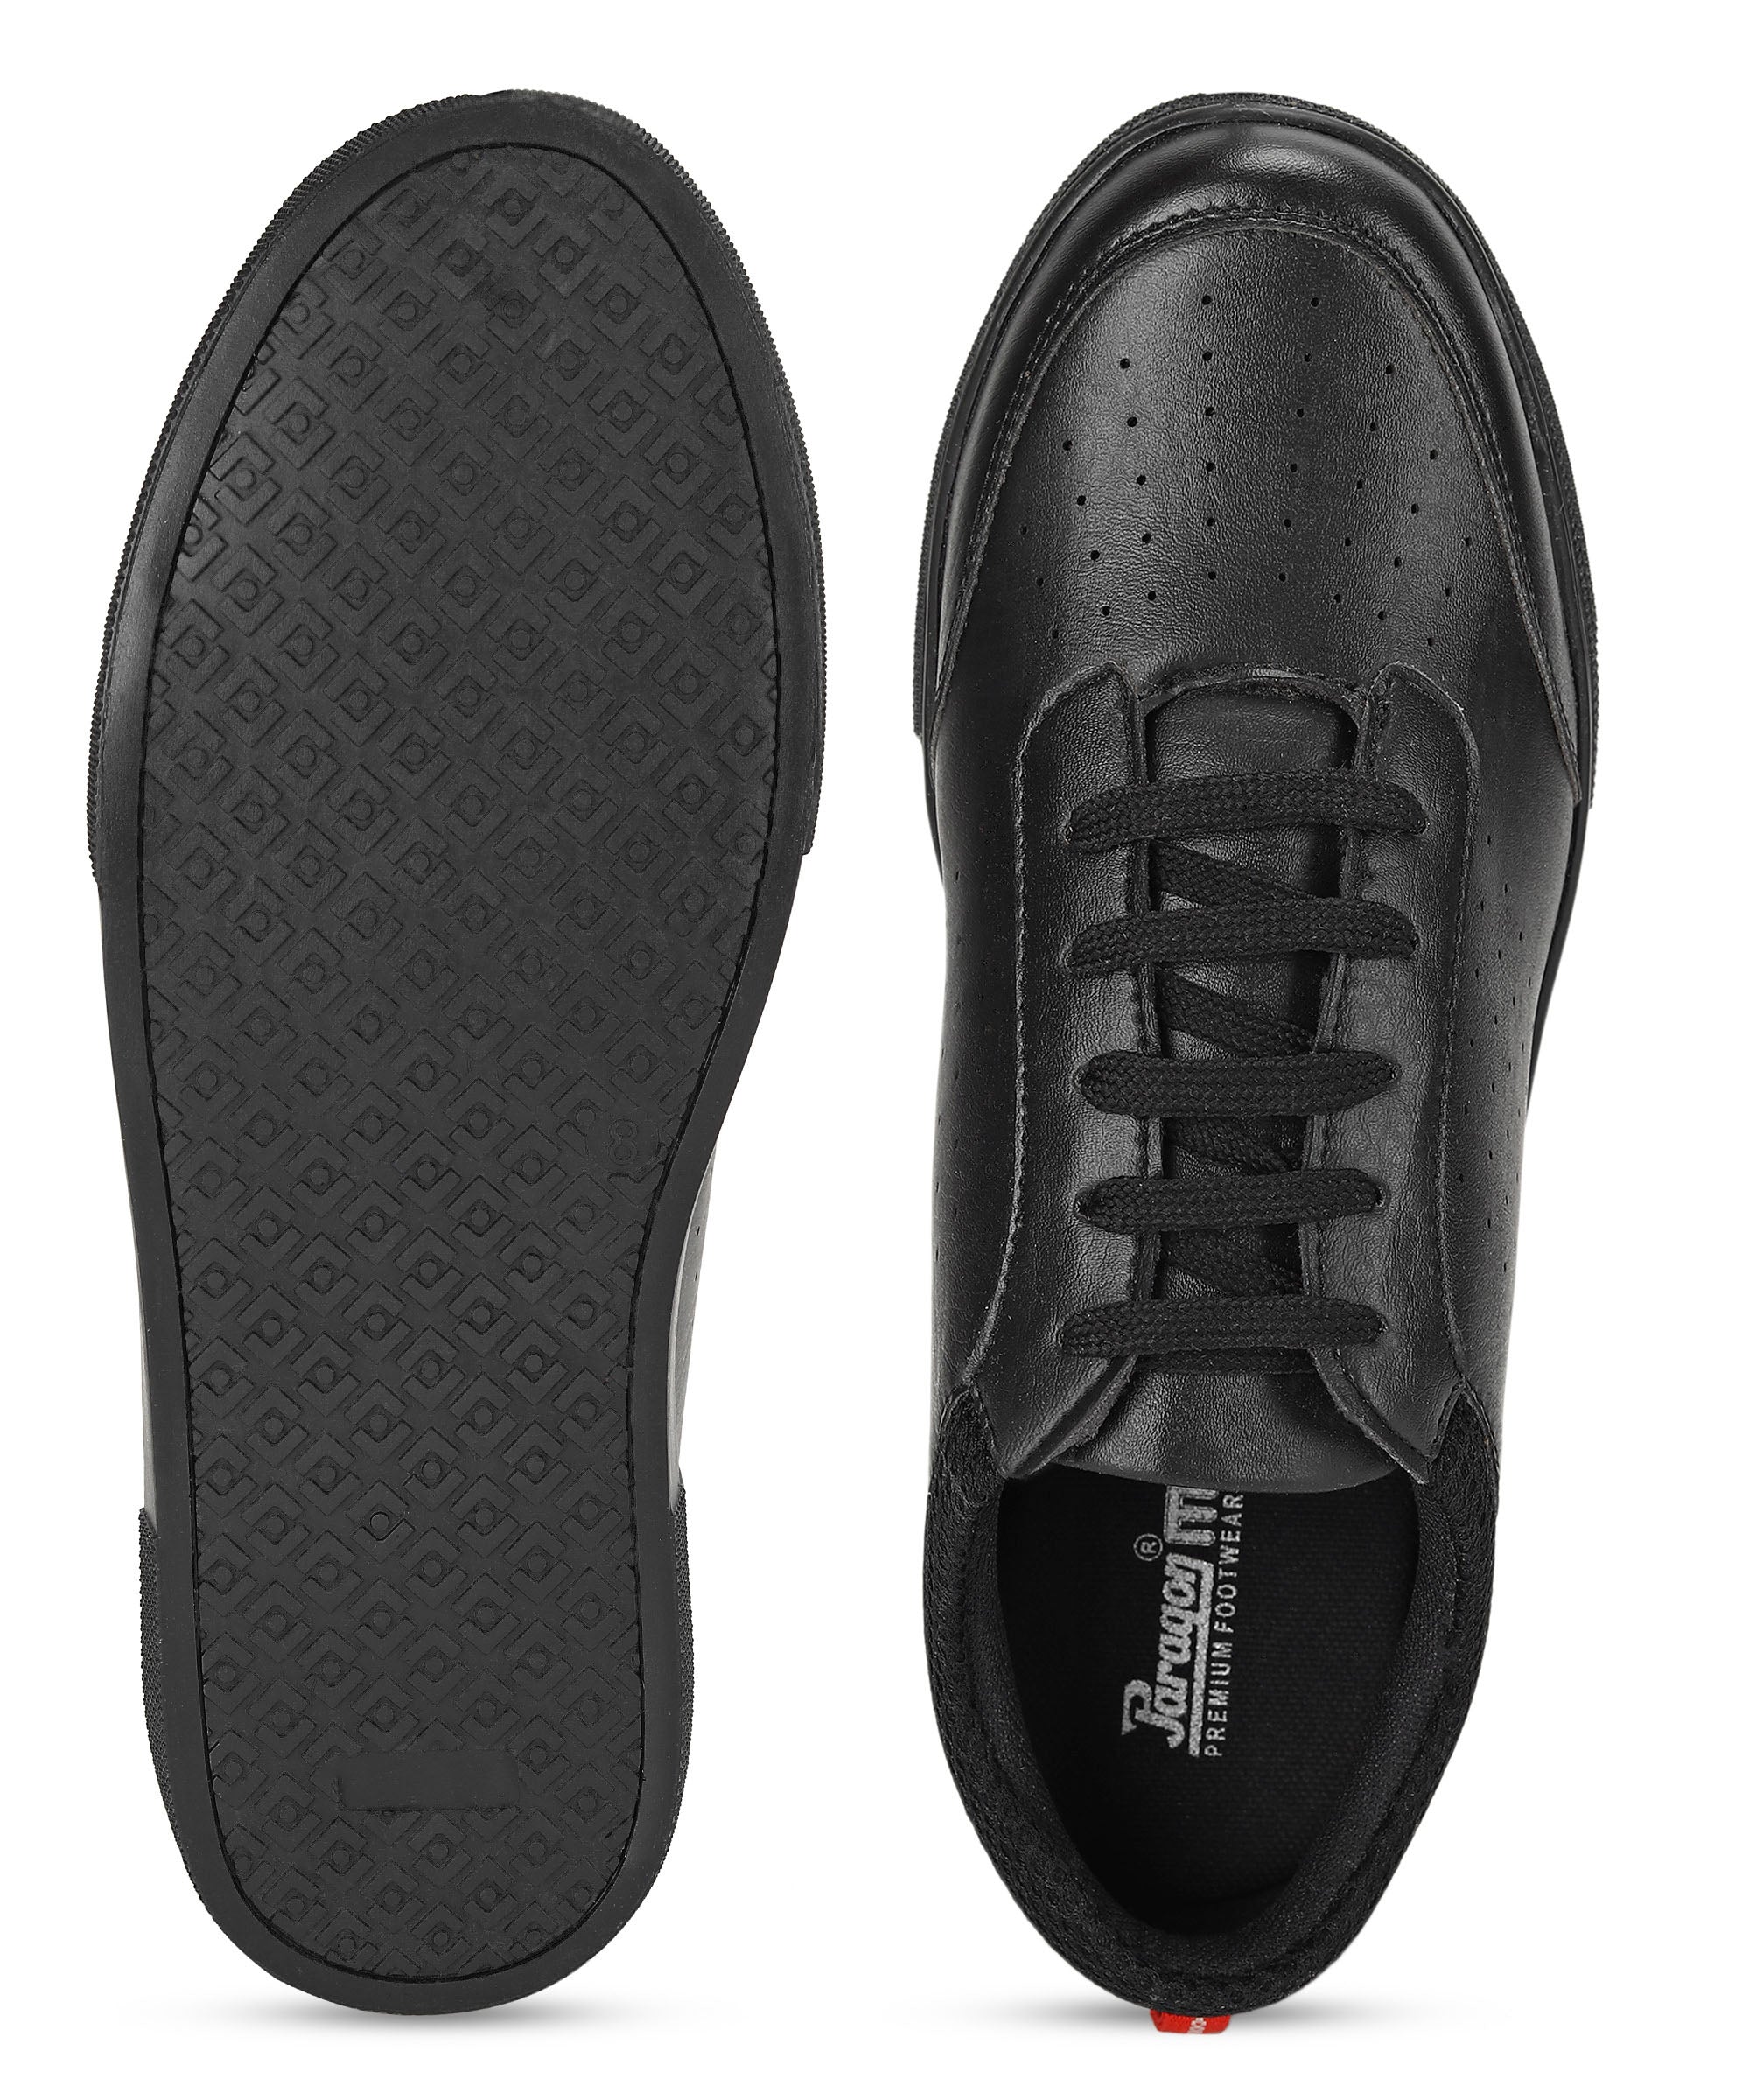 Paragon Max K1013G Men Casual Shoes | Stylish Walking Outdoor Shoes for Everyday Wear | Smart &amp; Trendy Design  | Comfortable Cushioned Soles Black